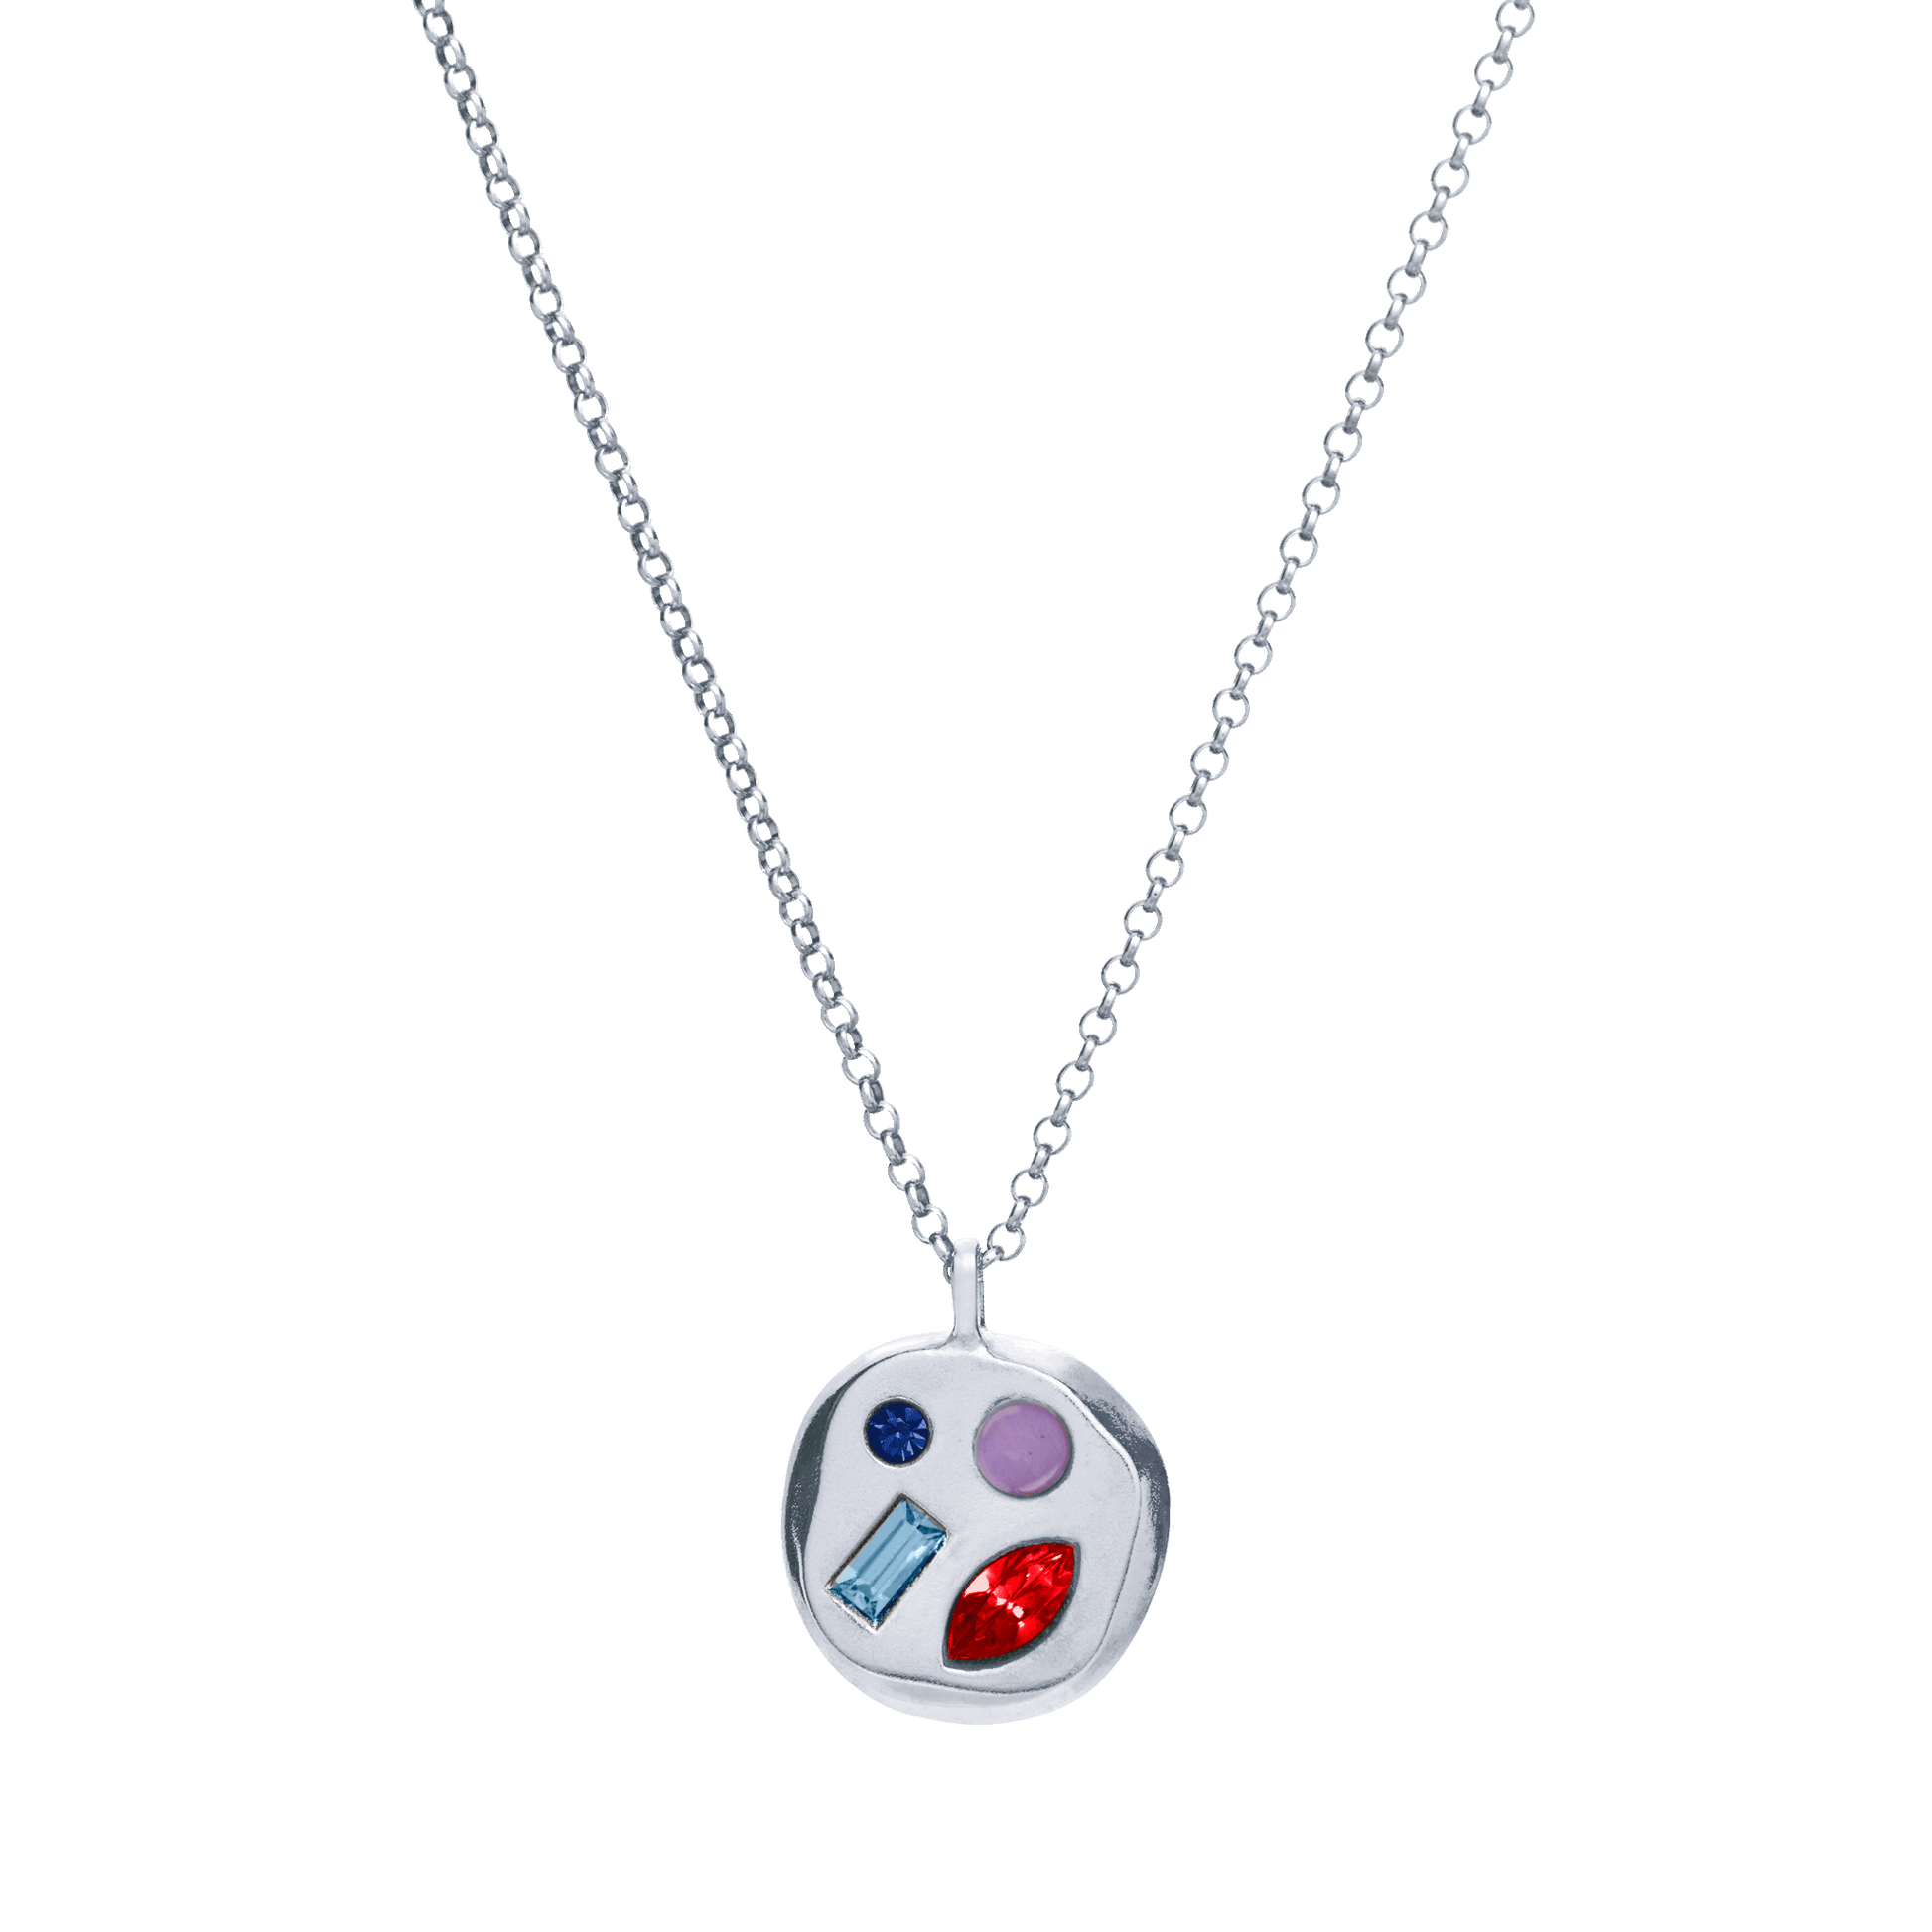 The January Seventeenth Pendant in Sterling Silver